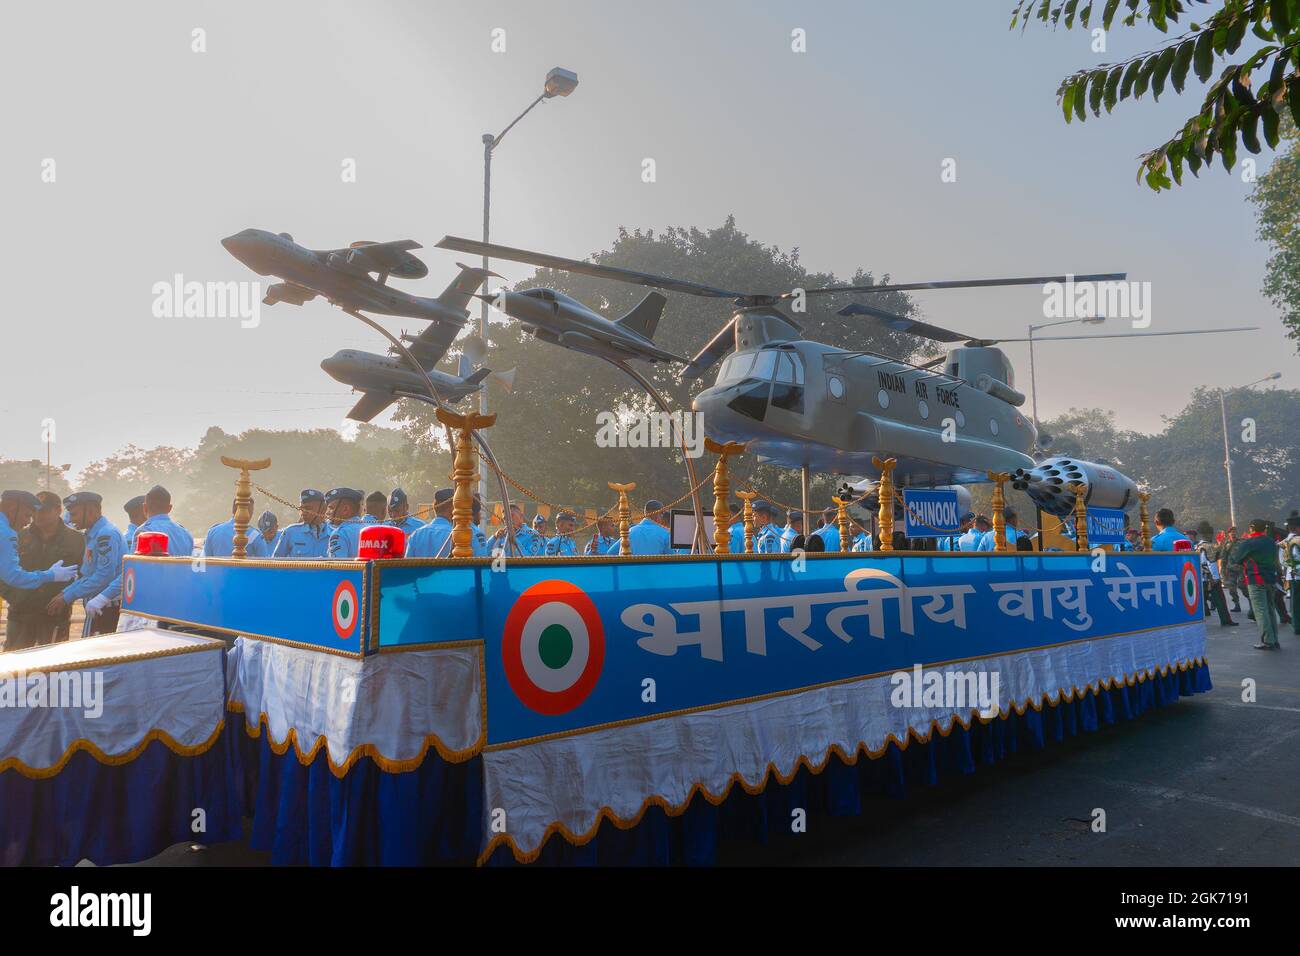 Kolkata, West Bengal, India - 23rd January 2018 : A replica of Chinook helicopter on display by Indian air force. Stock Photo